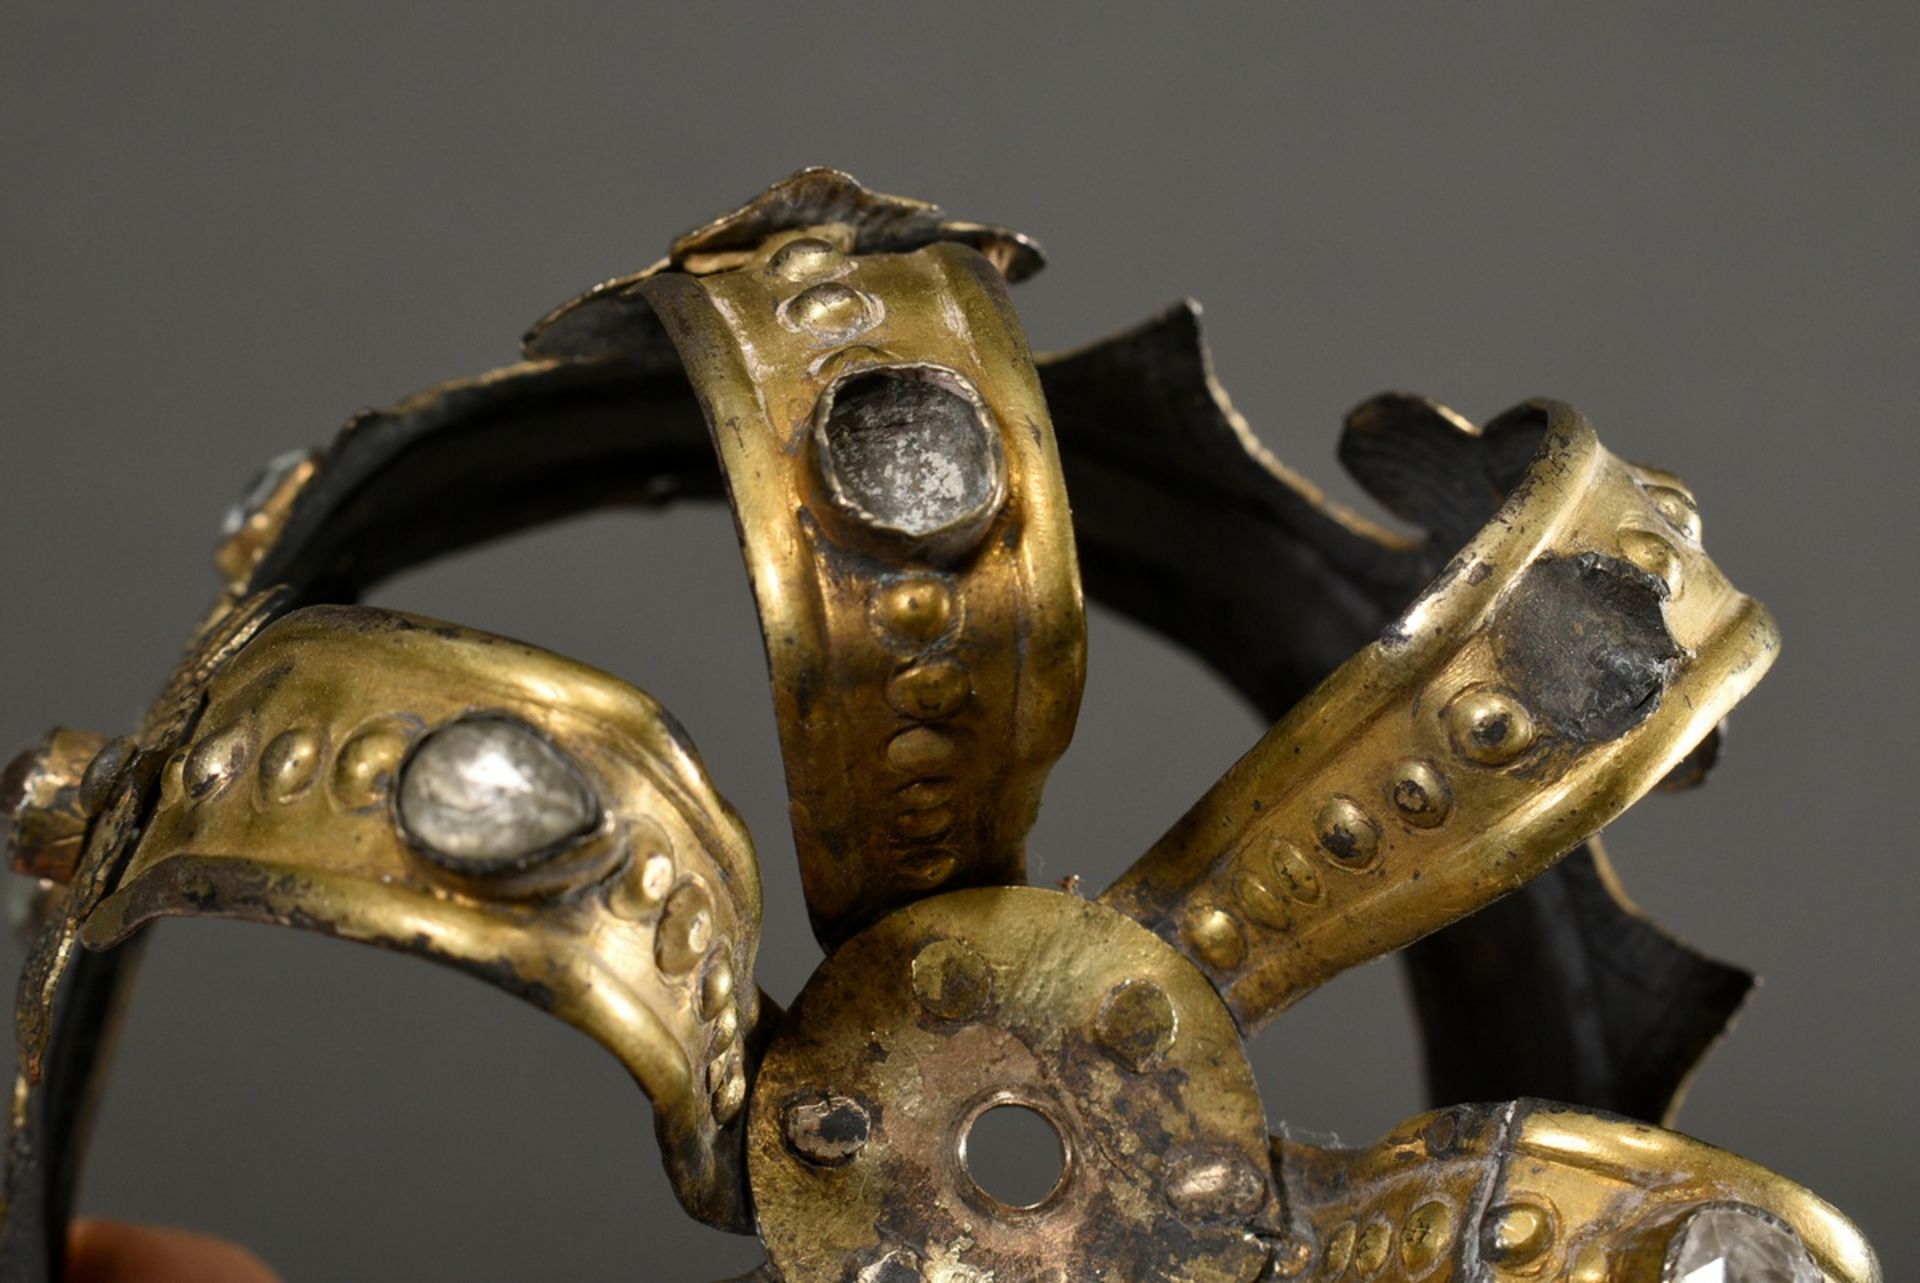 Antique crown of the Virgin Mary with glass stones, probably South German, 19th century, gilt metal - Image 7 of 9